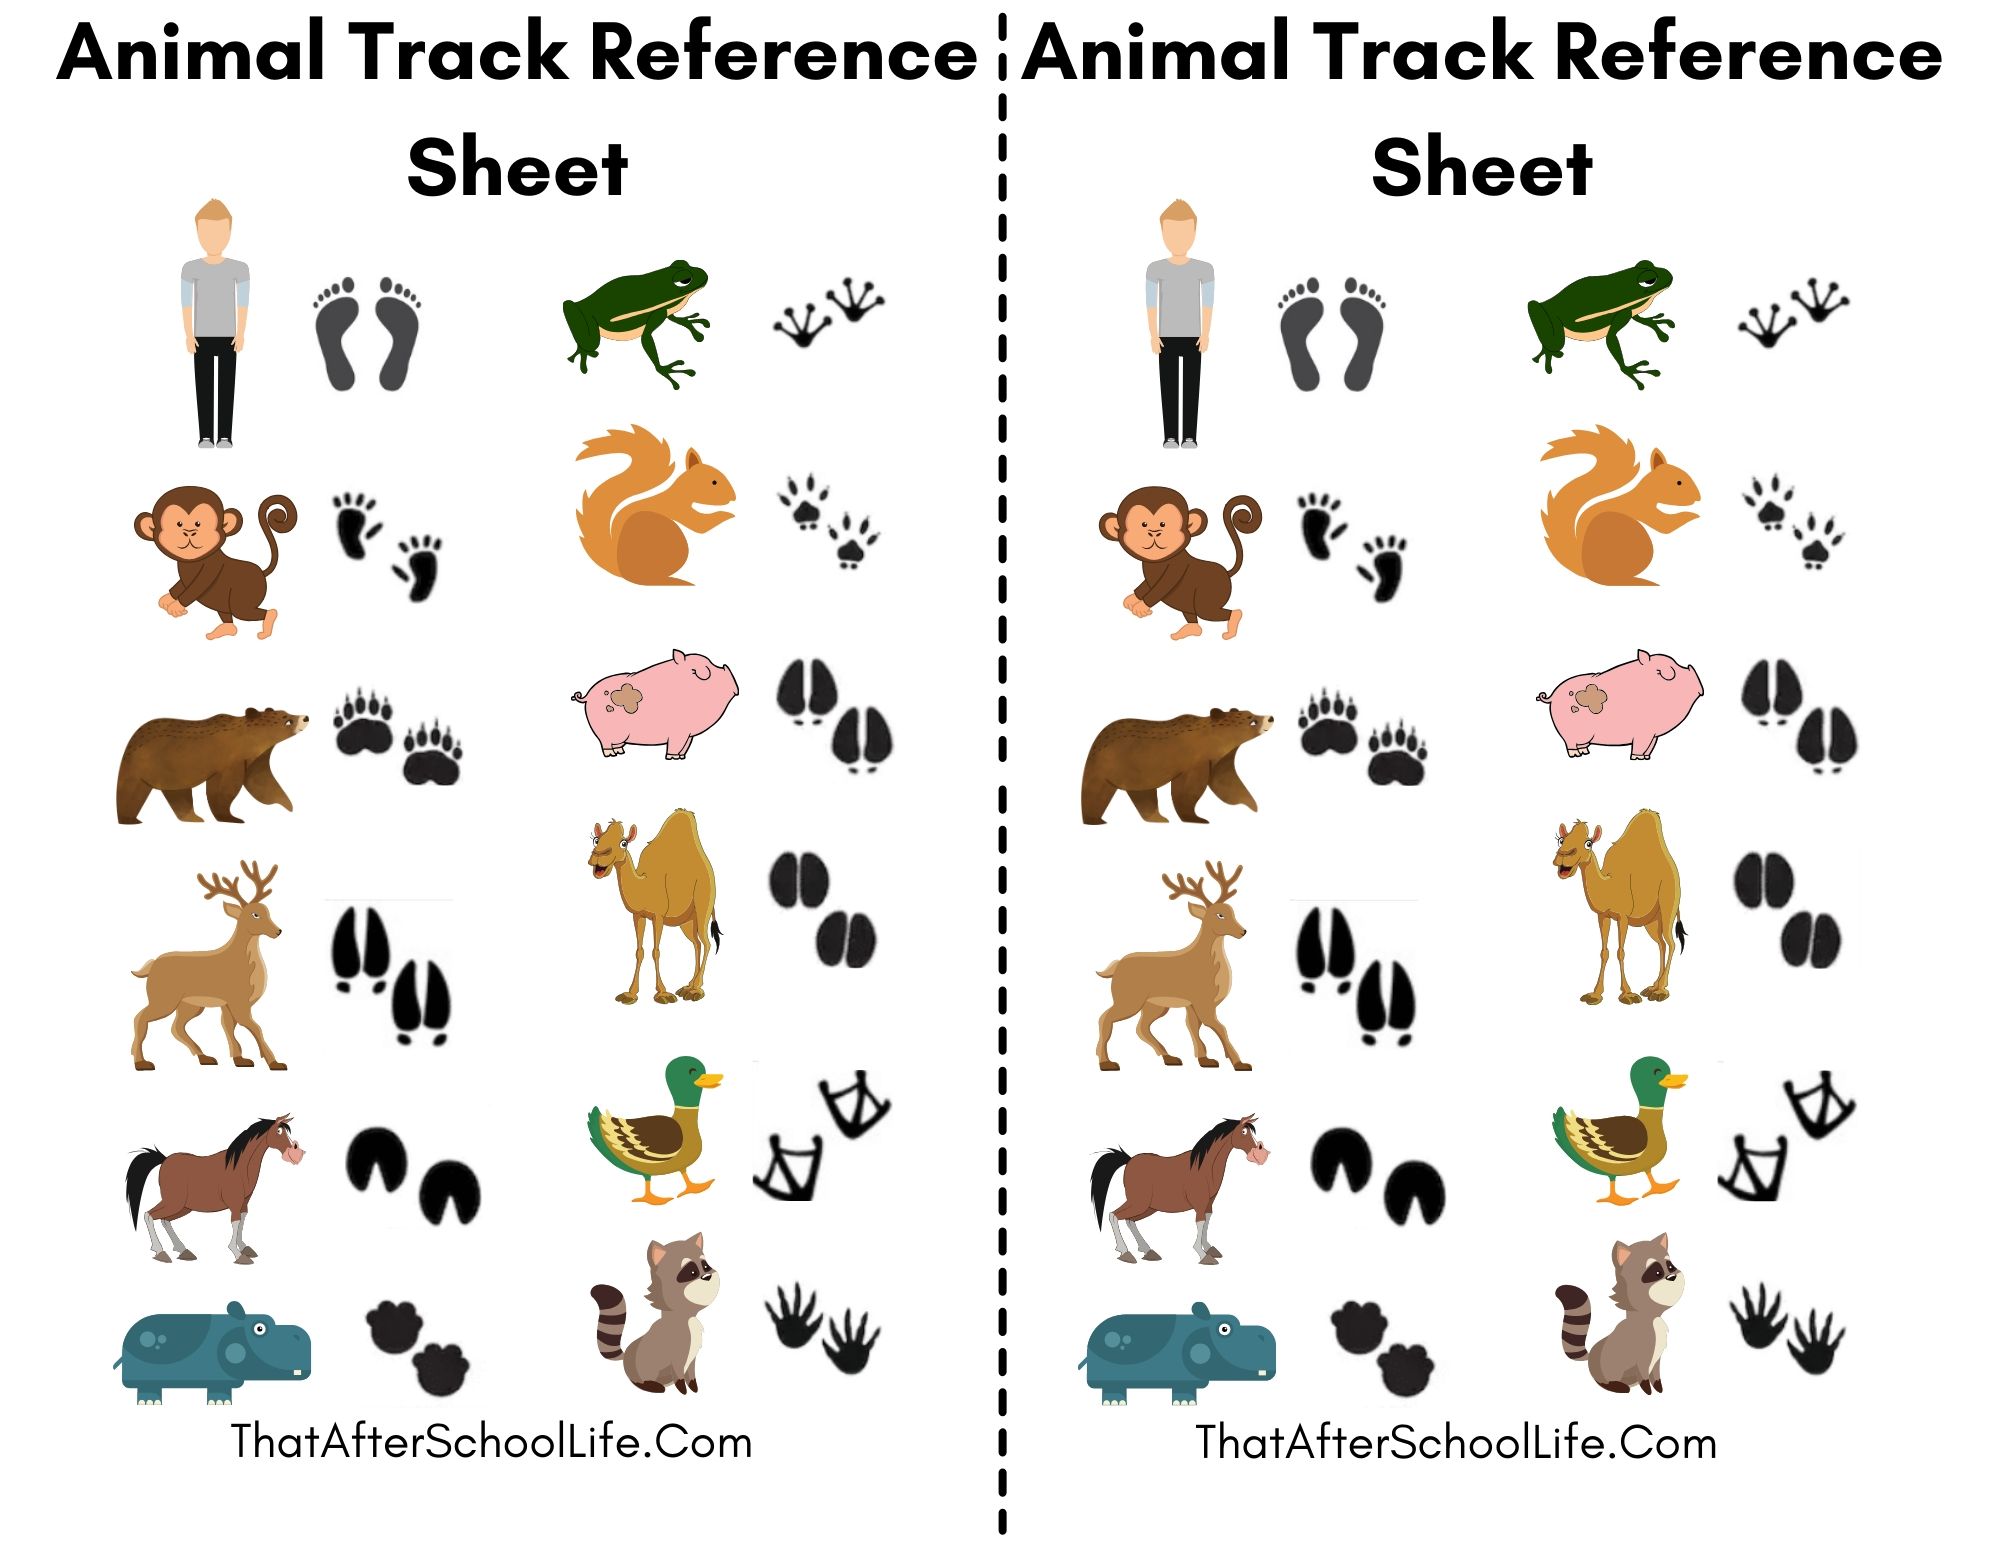 animal-track-memory-matching-game-that-after-school-life